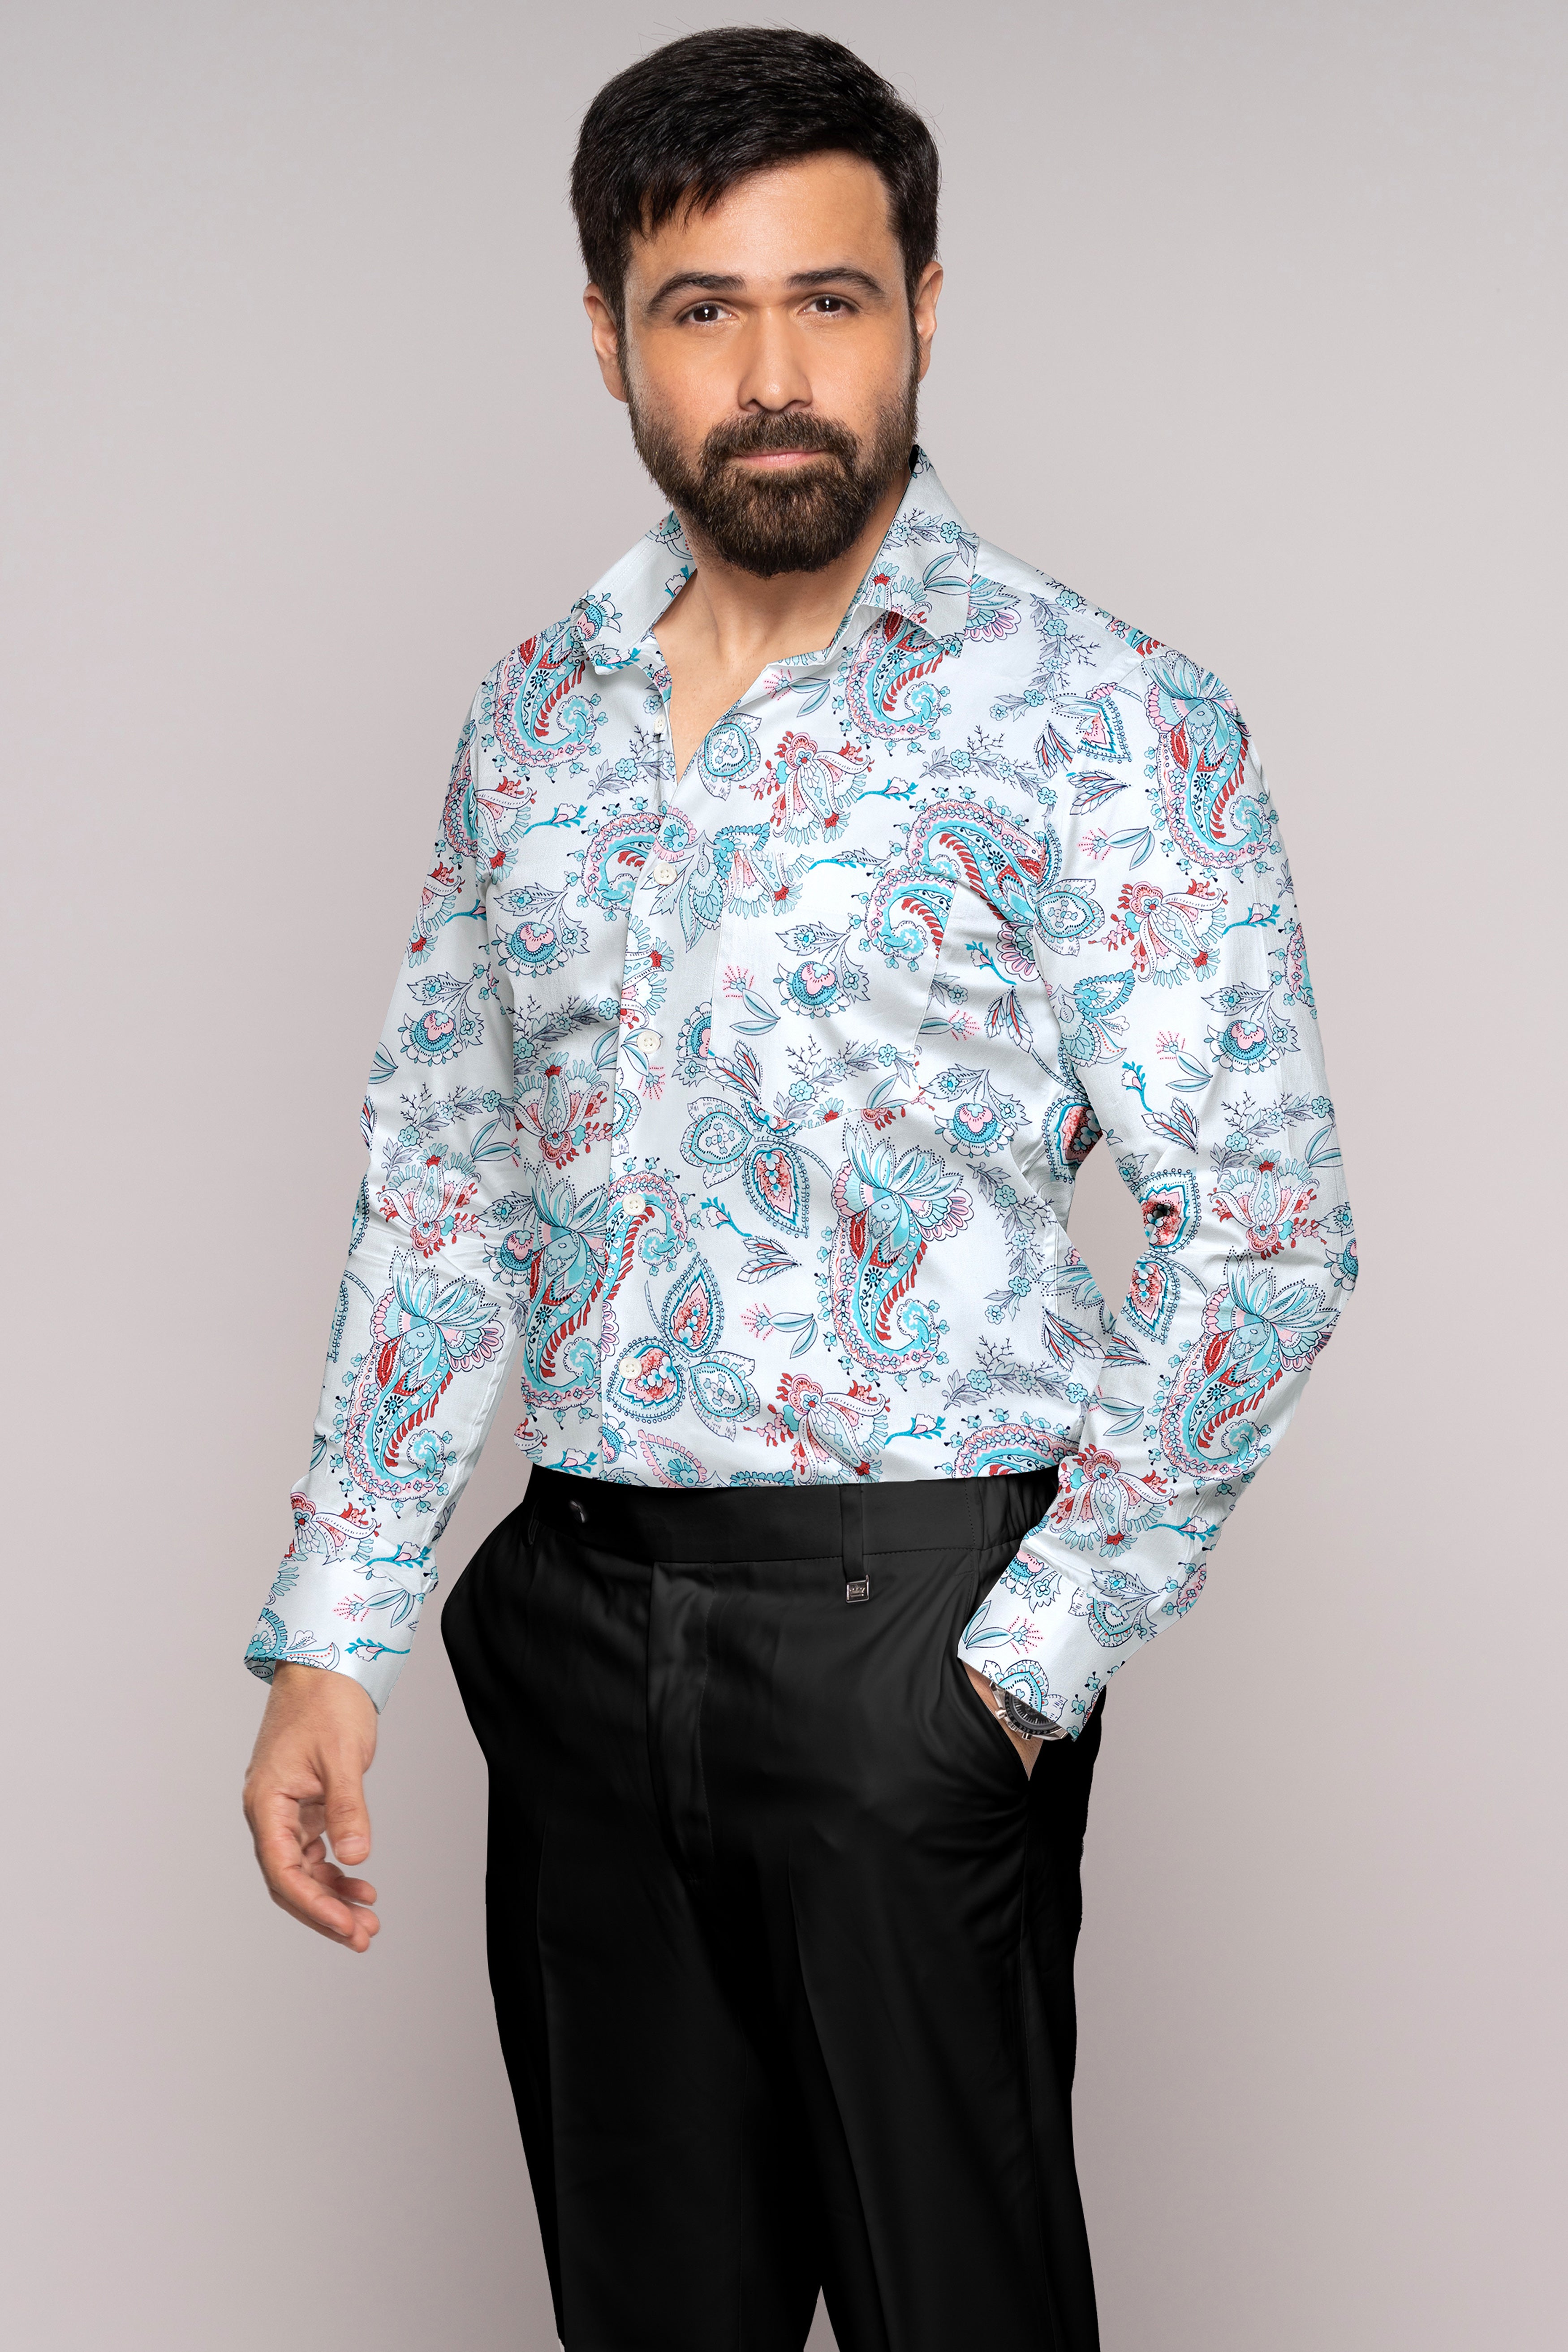 Bright White and Tiffany Blue Leaves Printed Subtle Sheen Super Soft Premium Cotton Shirt